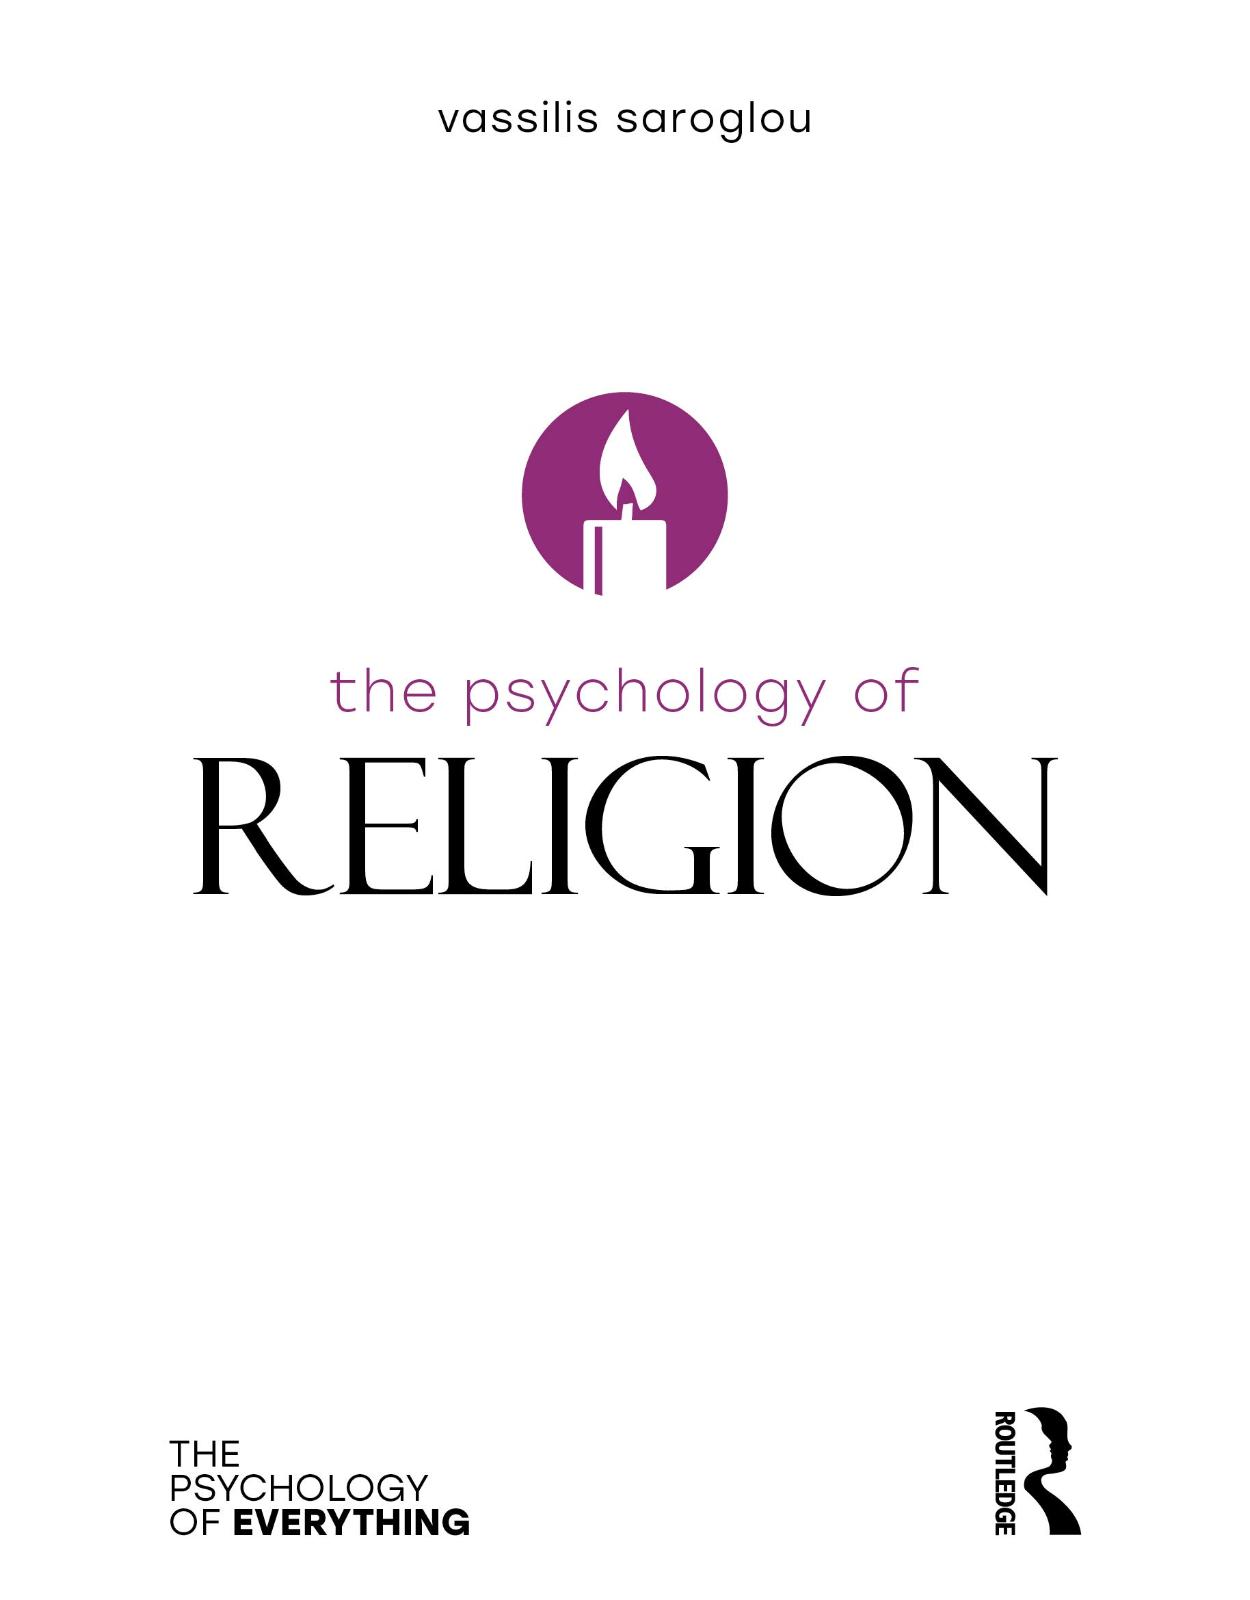 The Psychology of Religion (The Psychology of Everything)